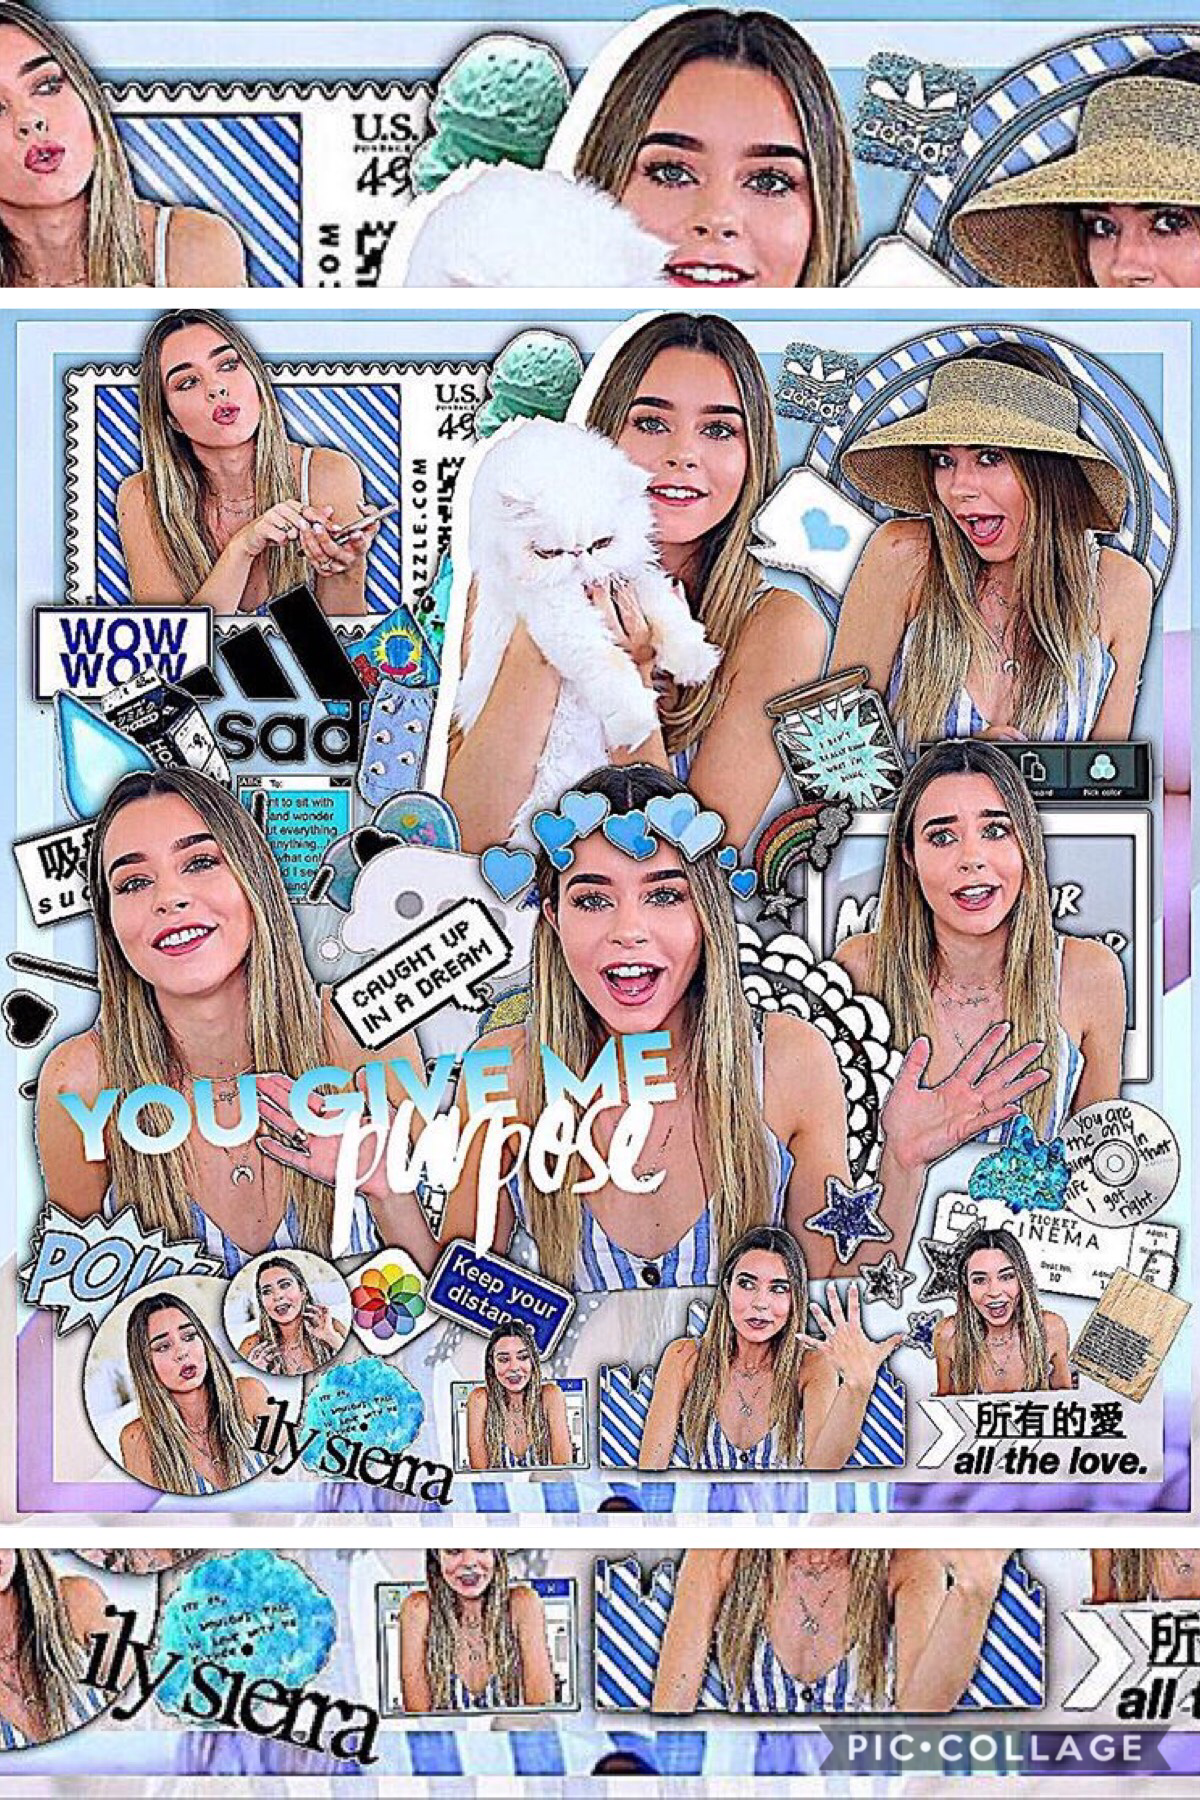 💜💙TAP!💙💜

Hey loves! How is your Saturday? This collage took SOOOOOOOOO long to make, I hope you like it! Comment down below if you want to make a collage account with me.

❤️🧡💛💚💙💜💗